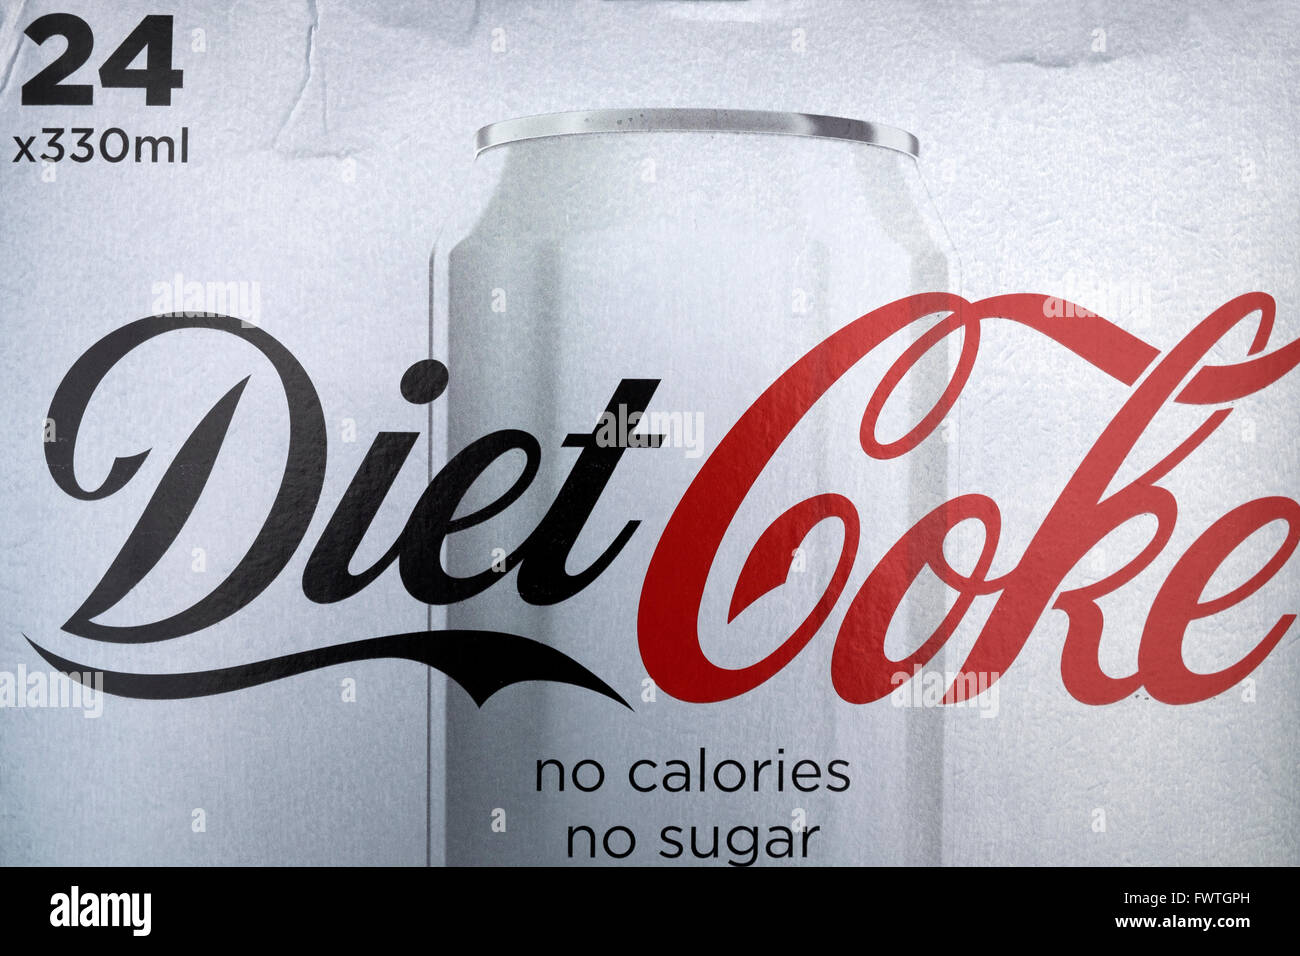 24 330ml cans of Diet Coke box Stock Photo